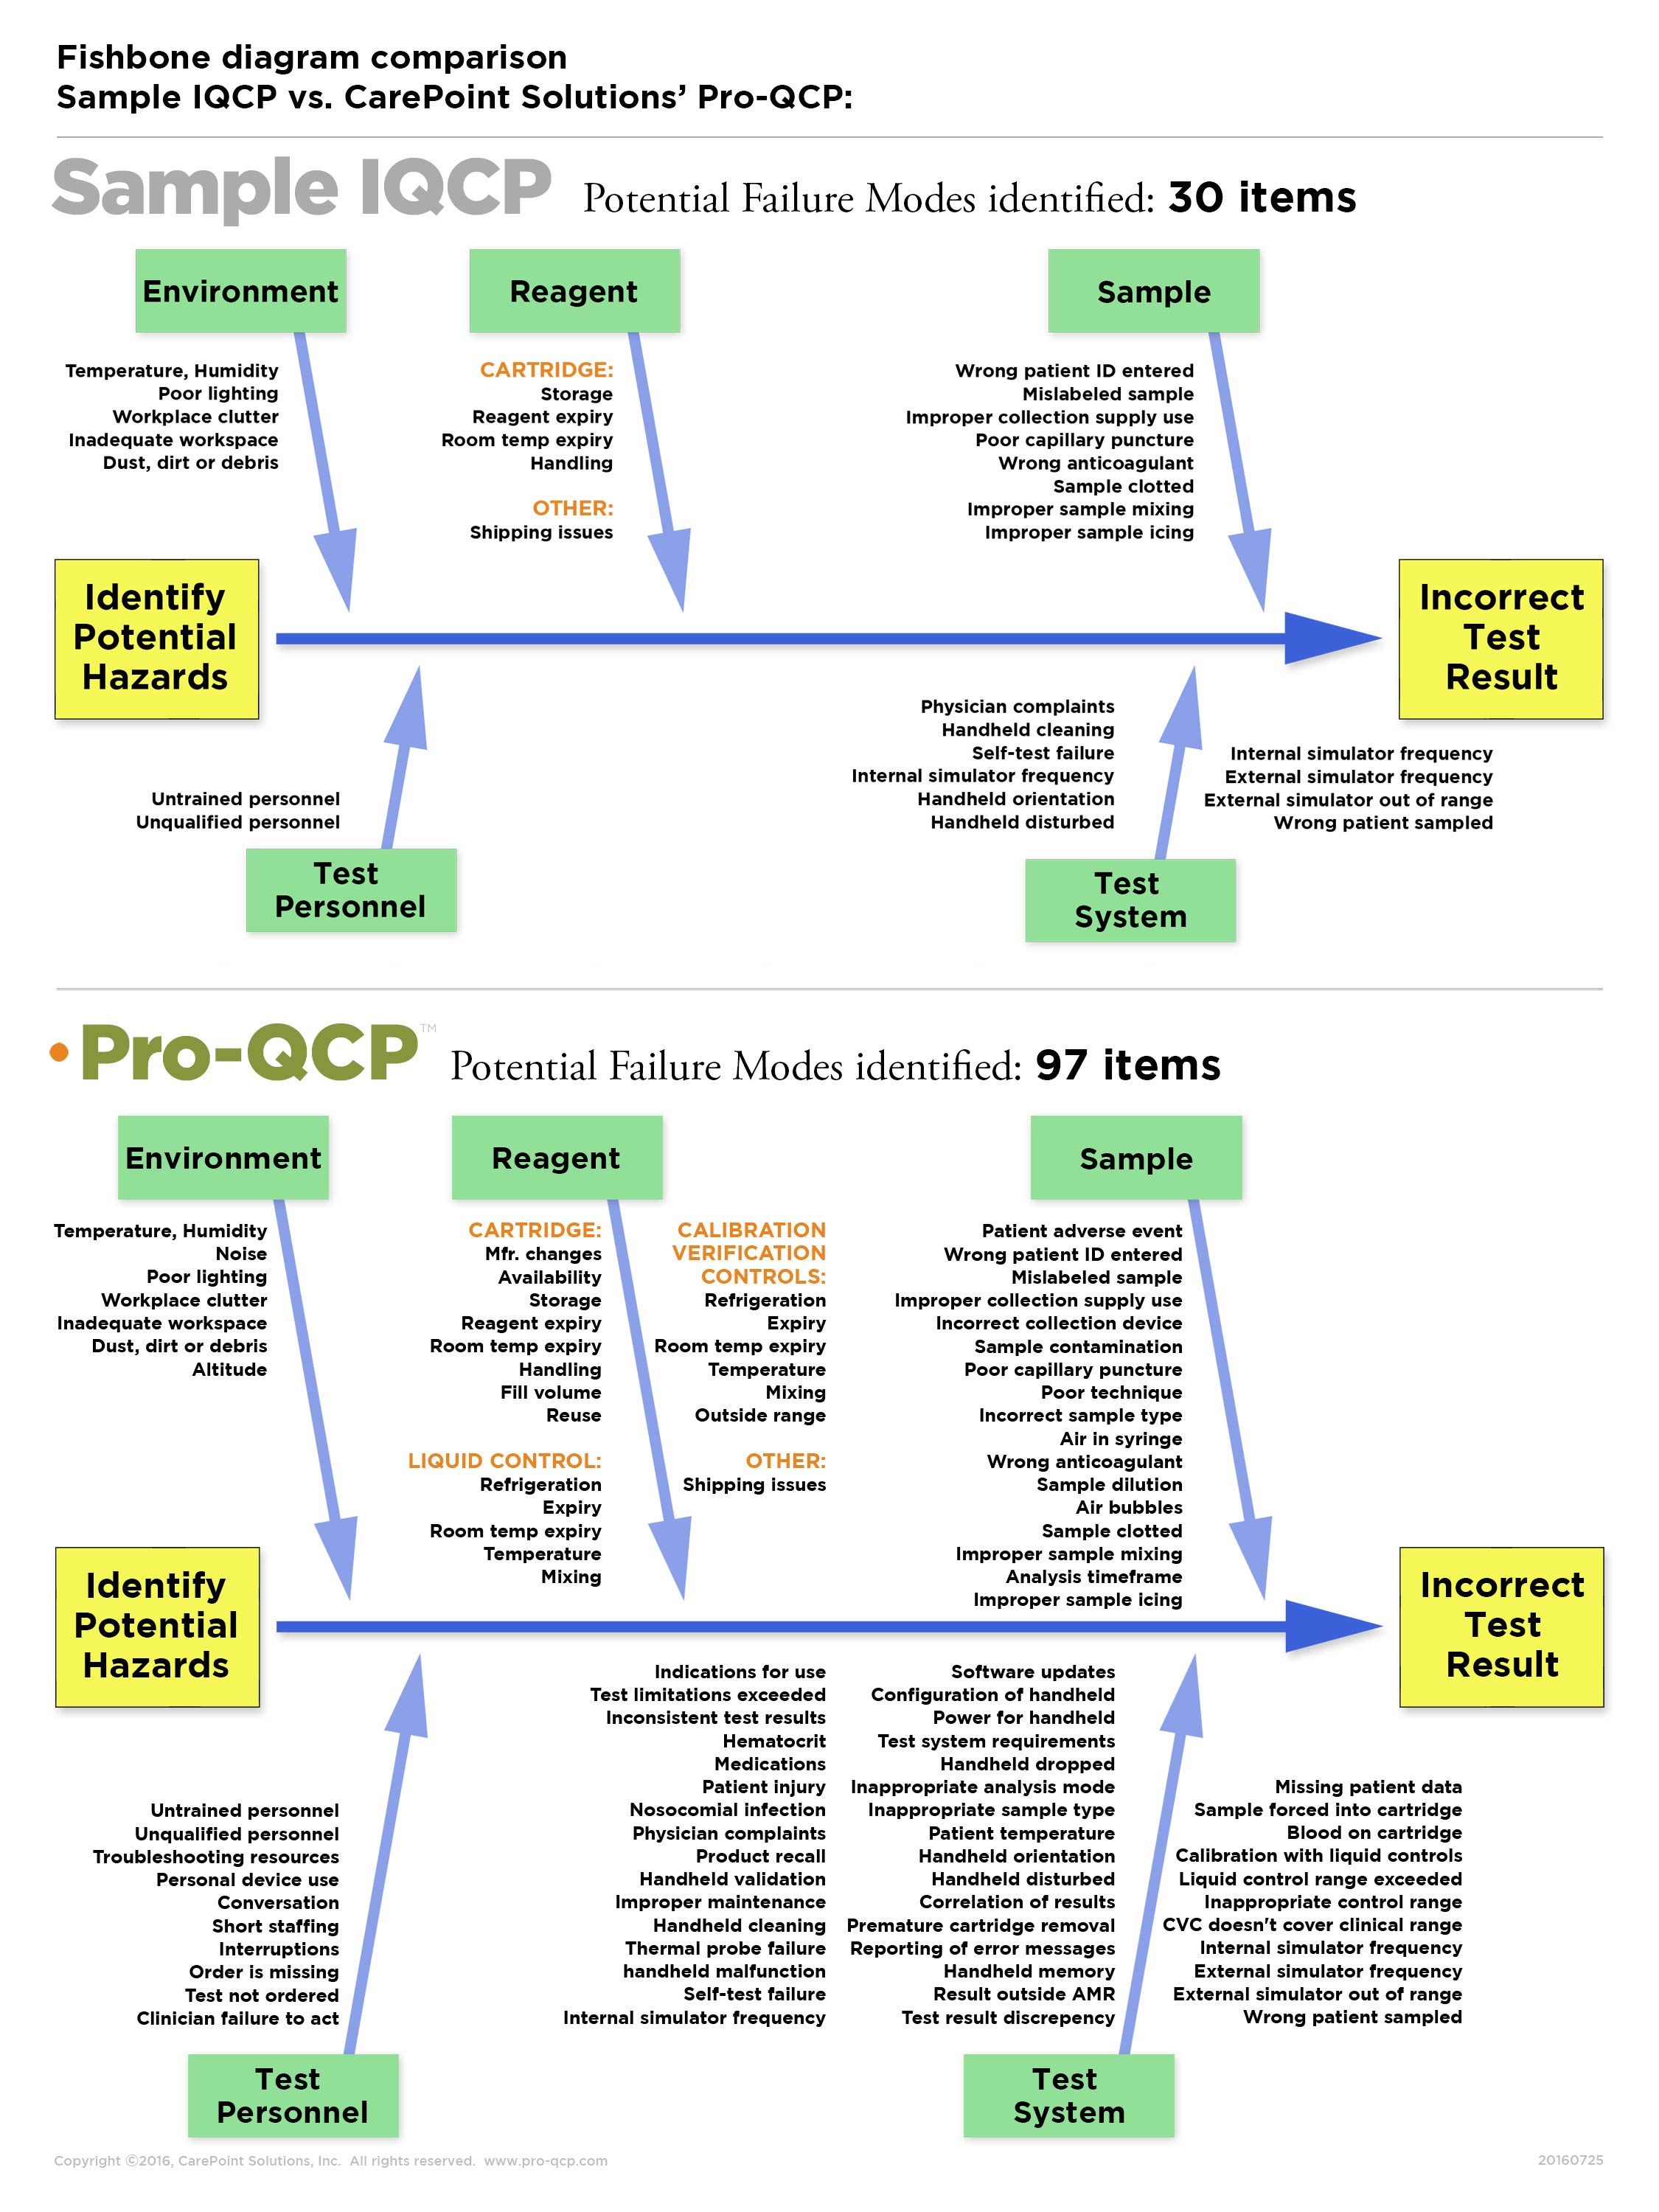 An Outside Review of an IQCP for POC - Westgard fishbone diagram control chart 